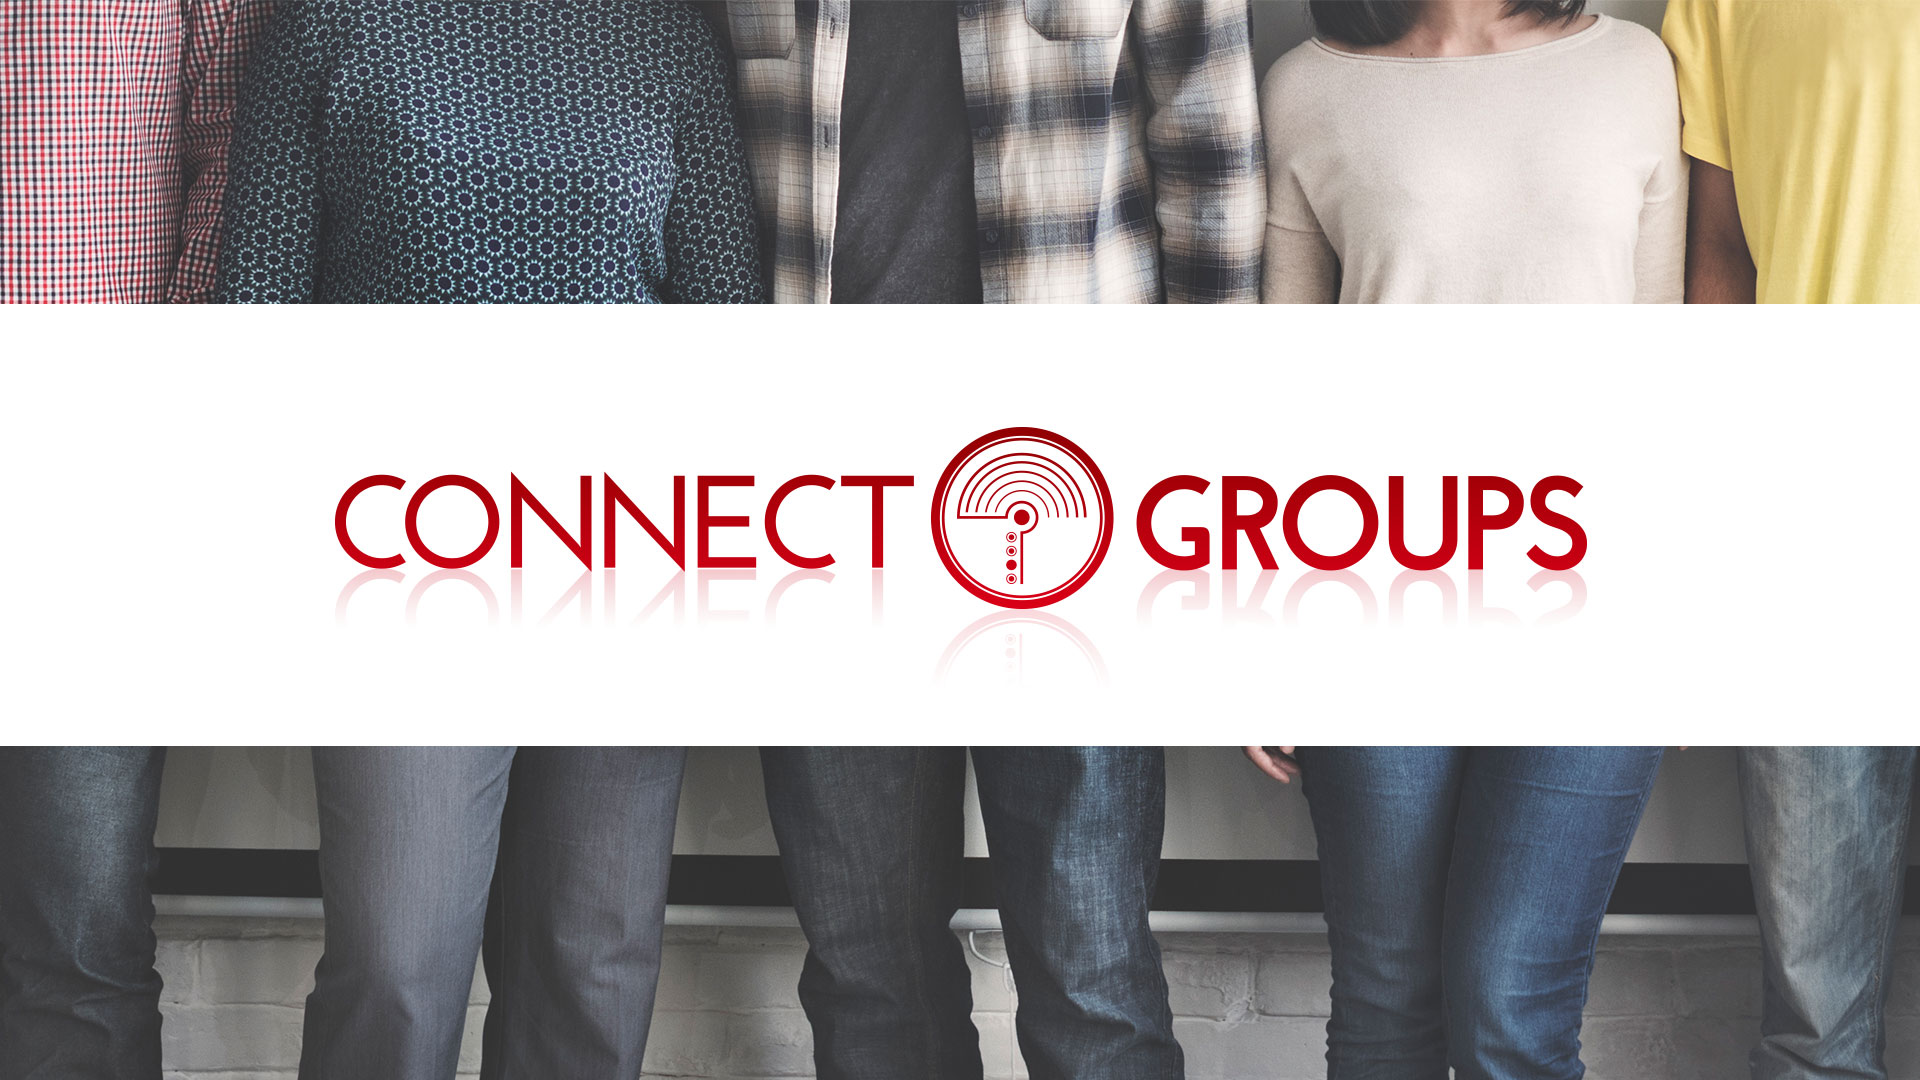 connect groups